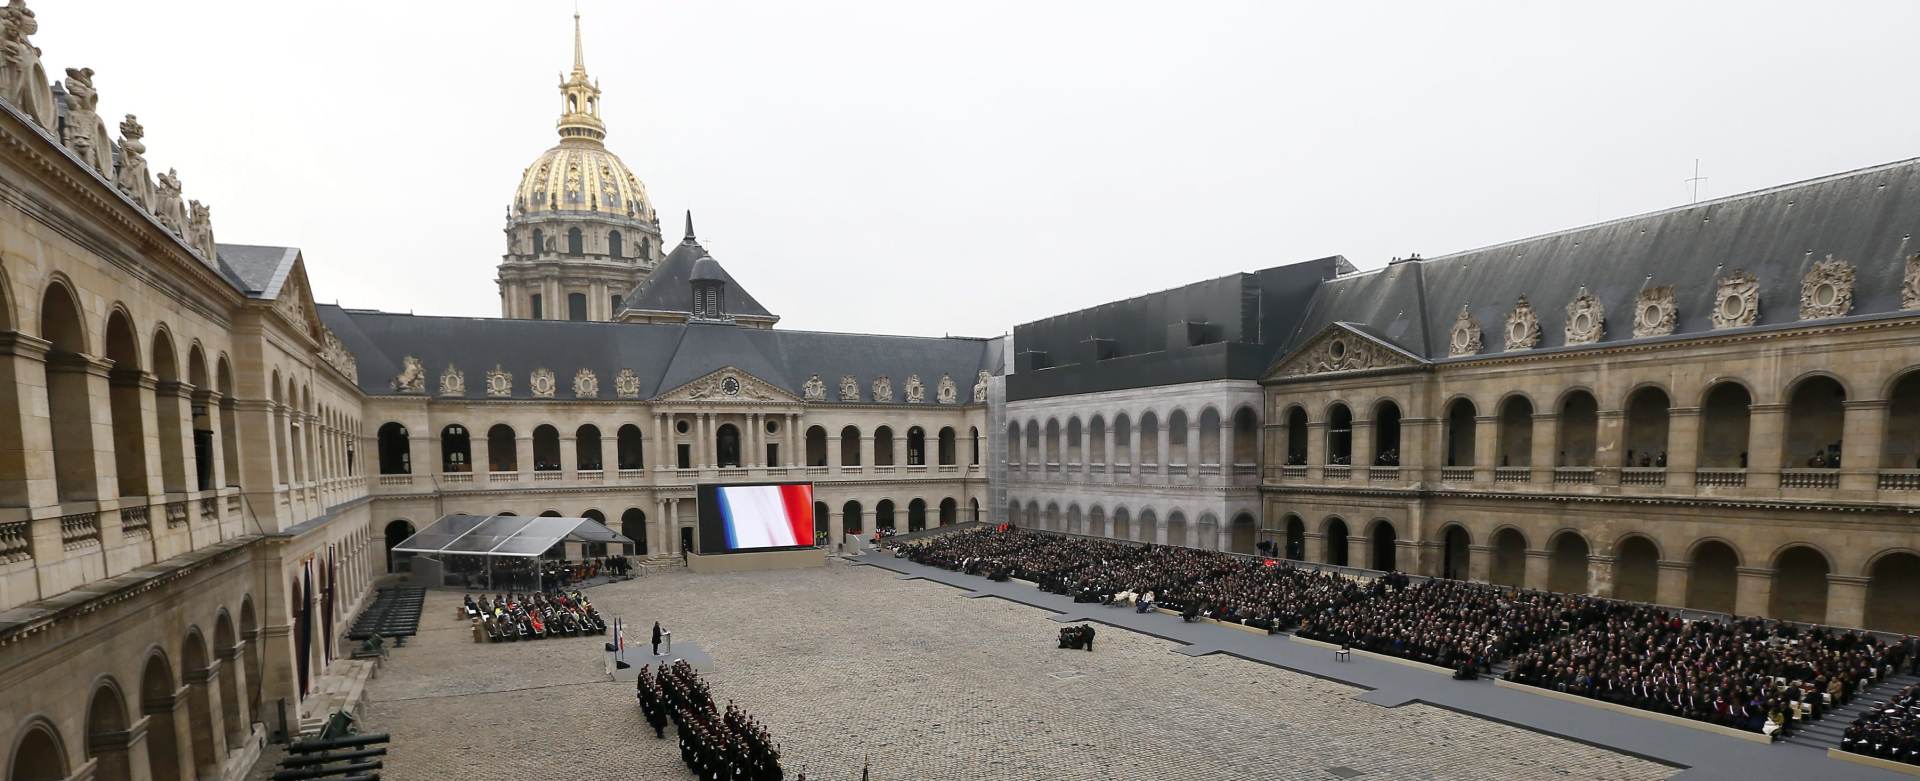 epa05044023 General view of the national memorial service to pay homage to the victims of the November 13 terrorist attacks, in the courtyard of the Invalides complex, in Paris, France, 27 November 2015. At least 130 people were killed and hundreds injured in the terror attacks which targeted the Bataclan concert hall, the Stade de France national sports stadium, and several restaurants and bars in the French capital on 13 November 2015.  EPA/IAN LANGSDON